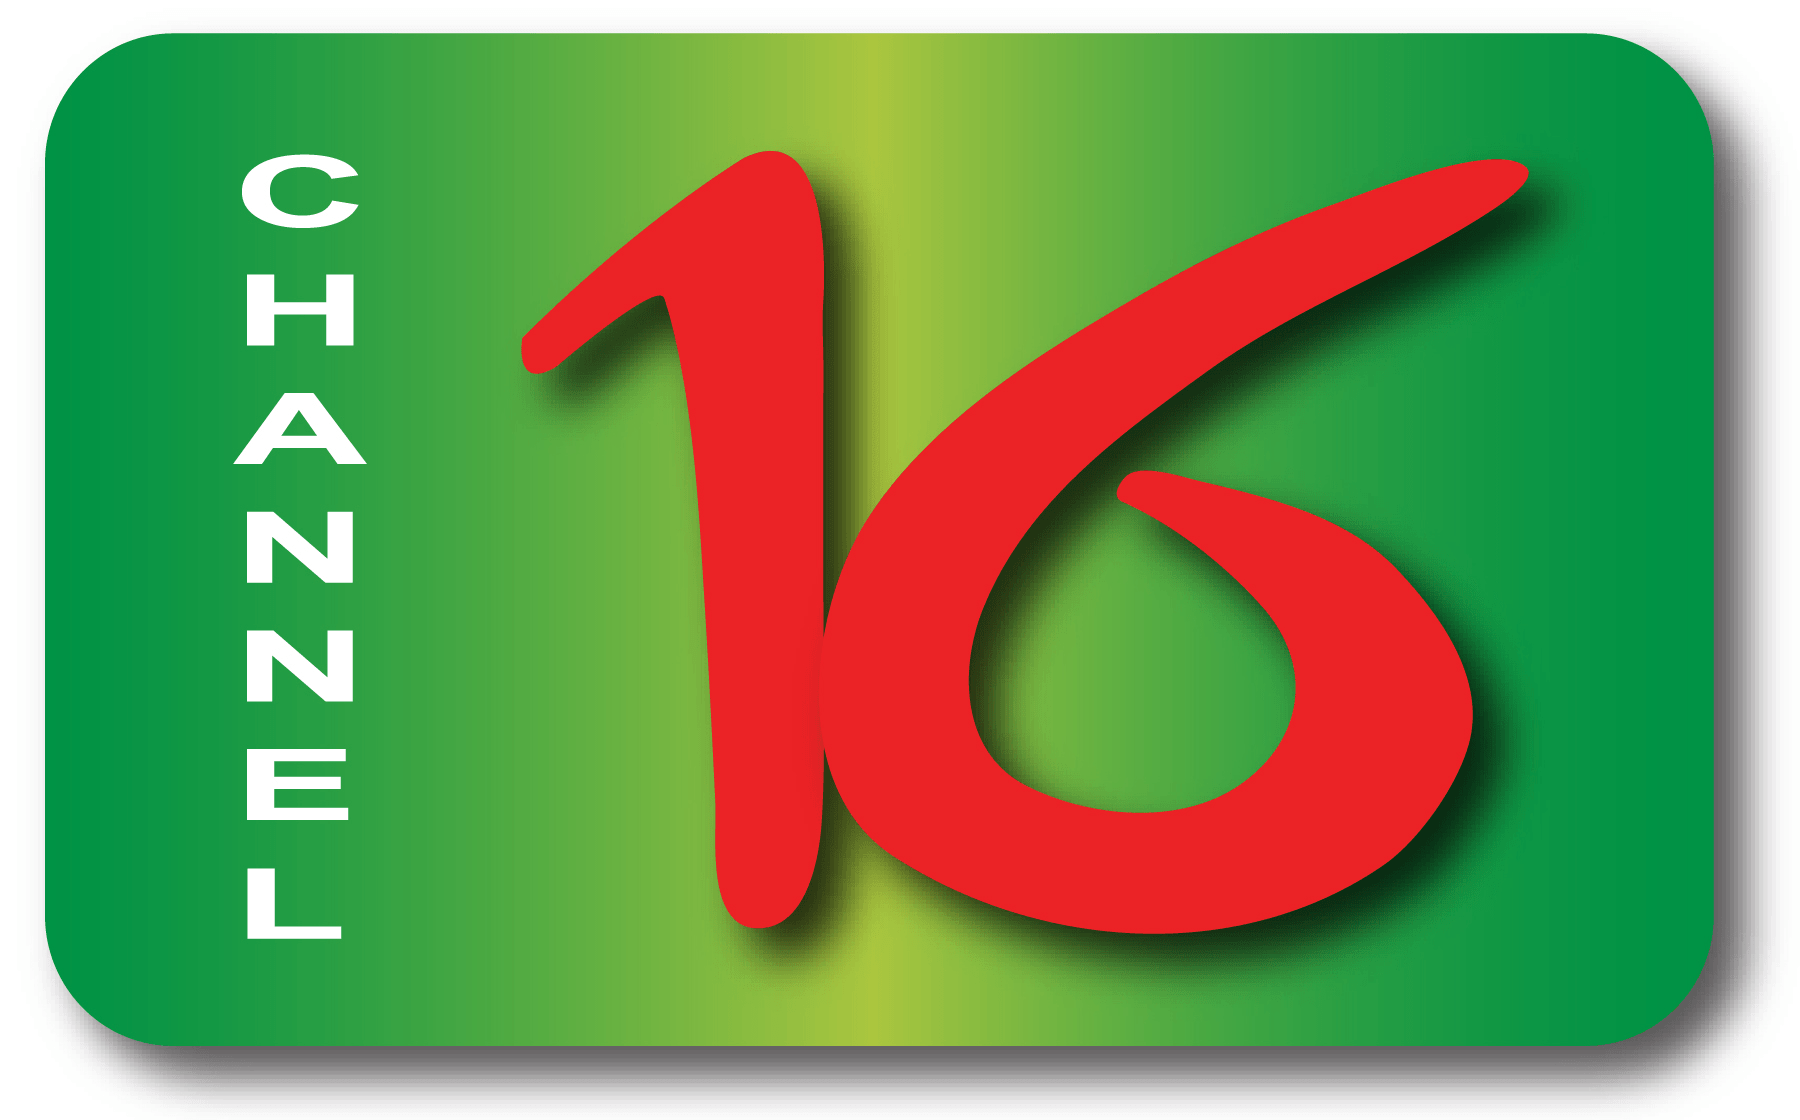 16 Logo - File:Channel 16 bd.png - Wikimedia Commons